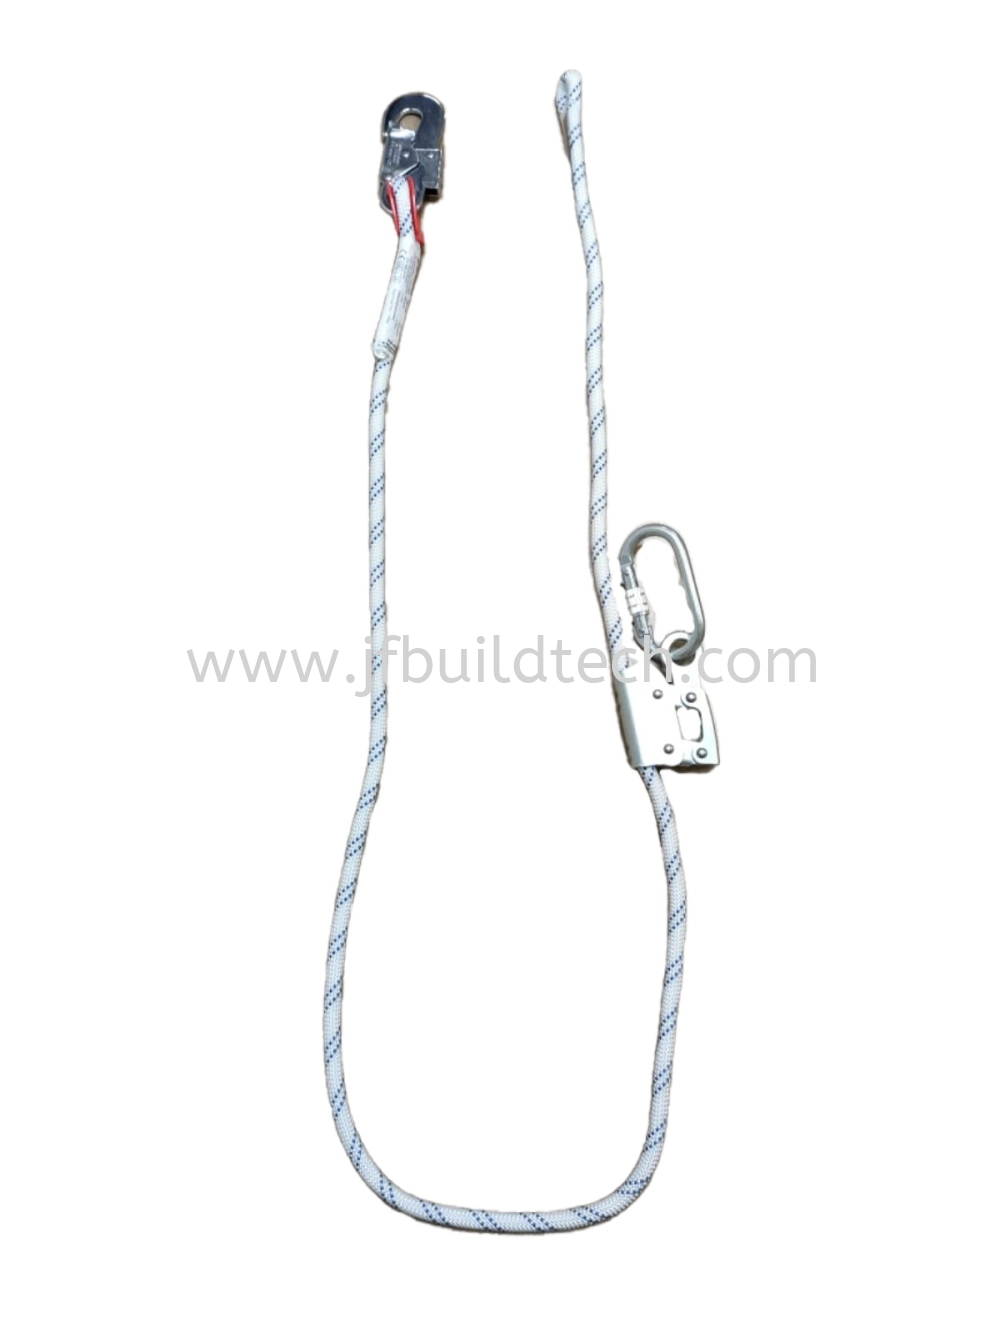 WORKING POSITIONING ADJUSTABLE LANYARD EAL13101-A-Stabil 